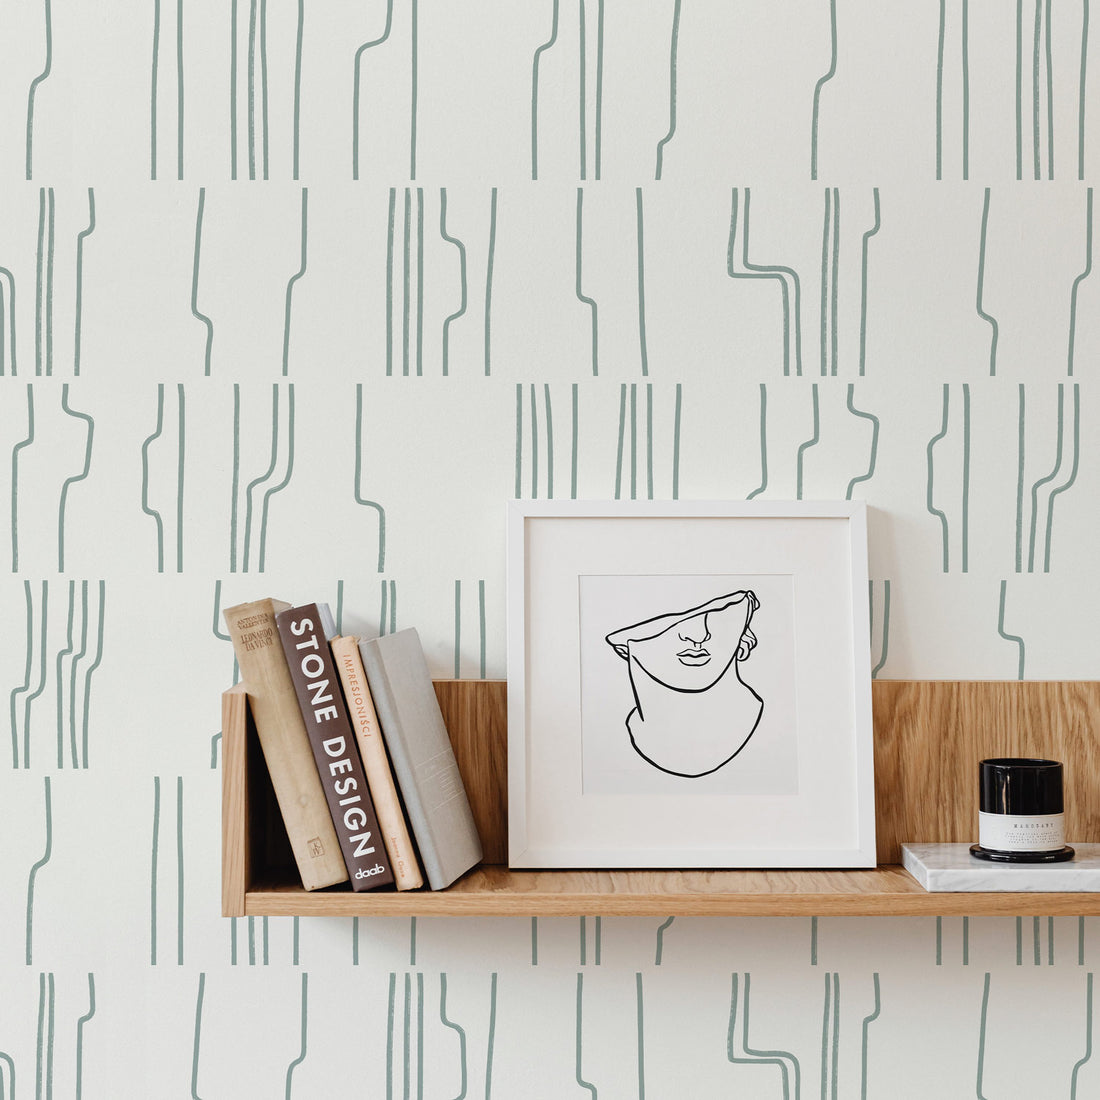 light green crooked lines wallpaper pattern with shelf styling